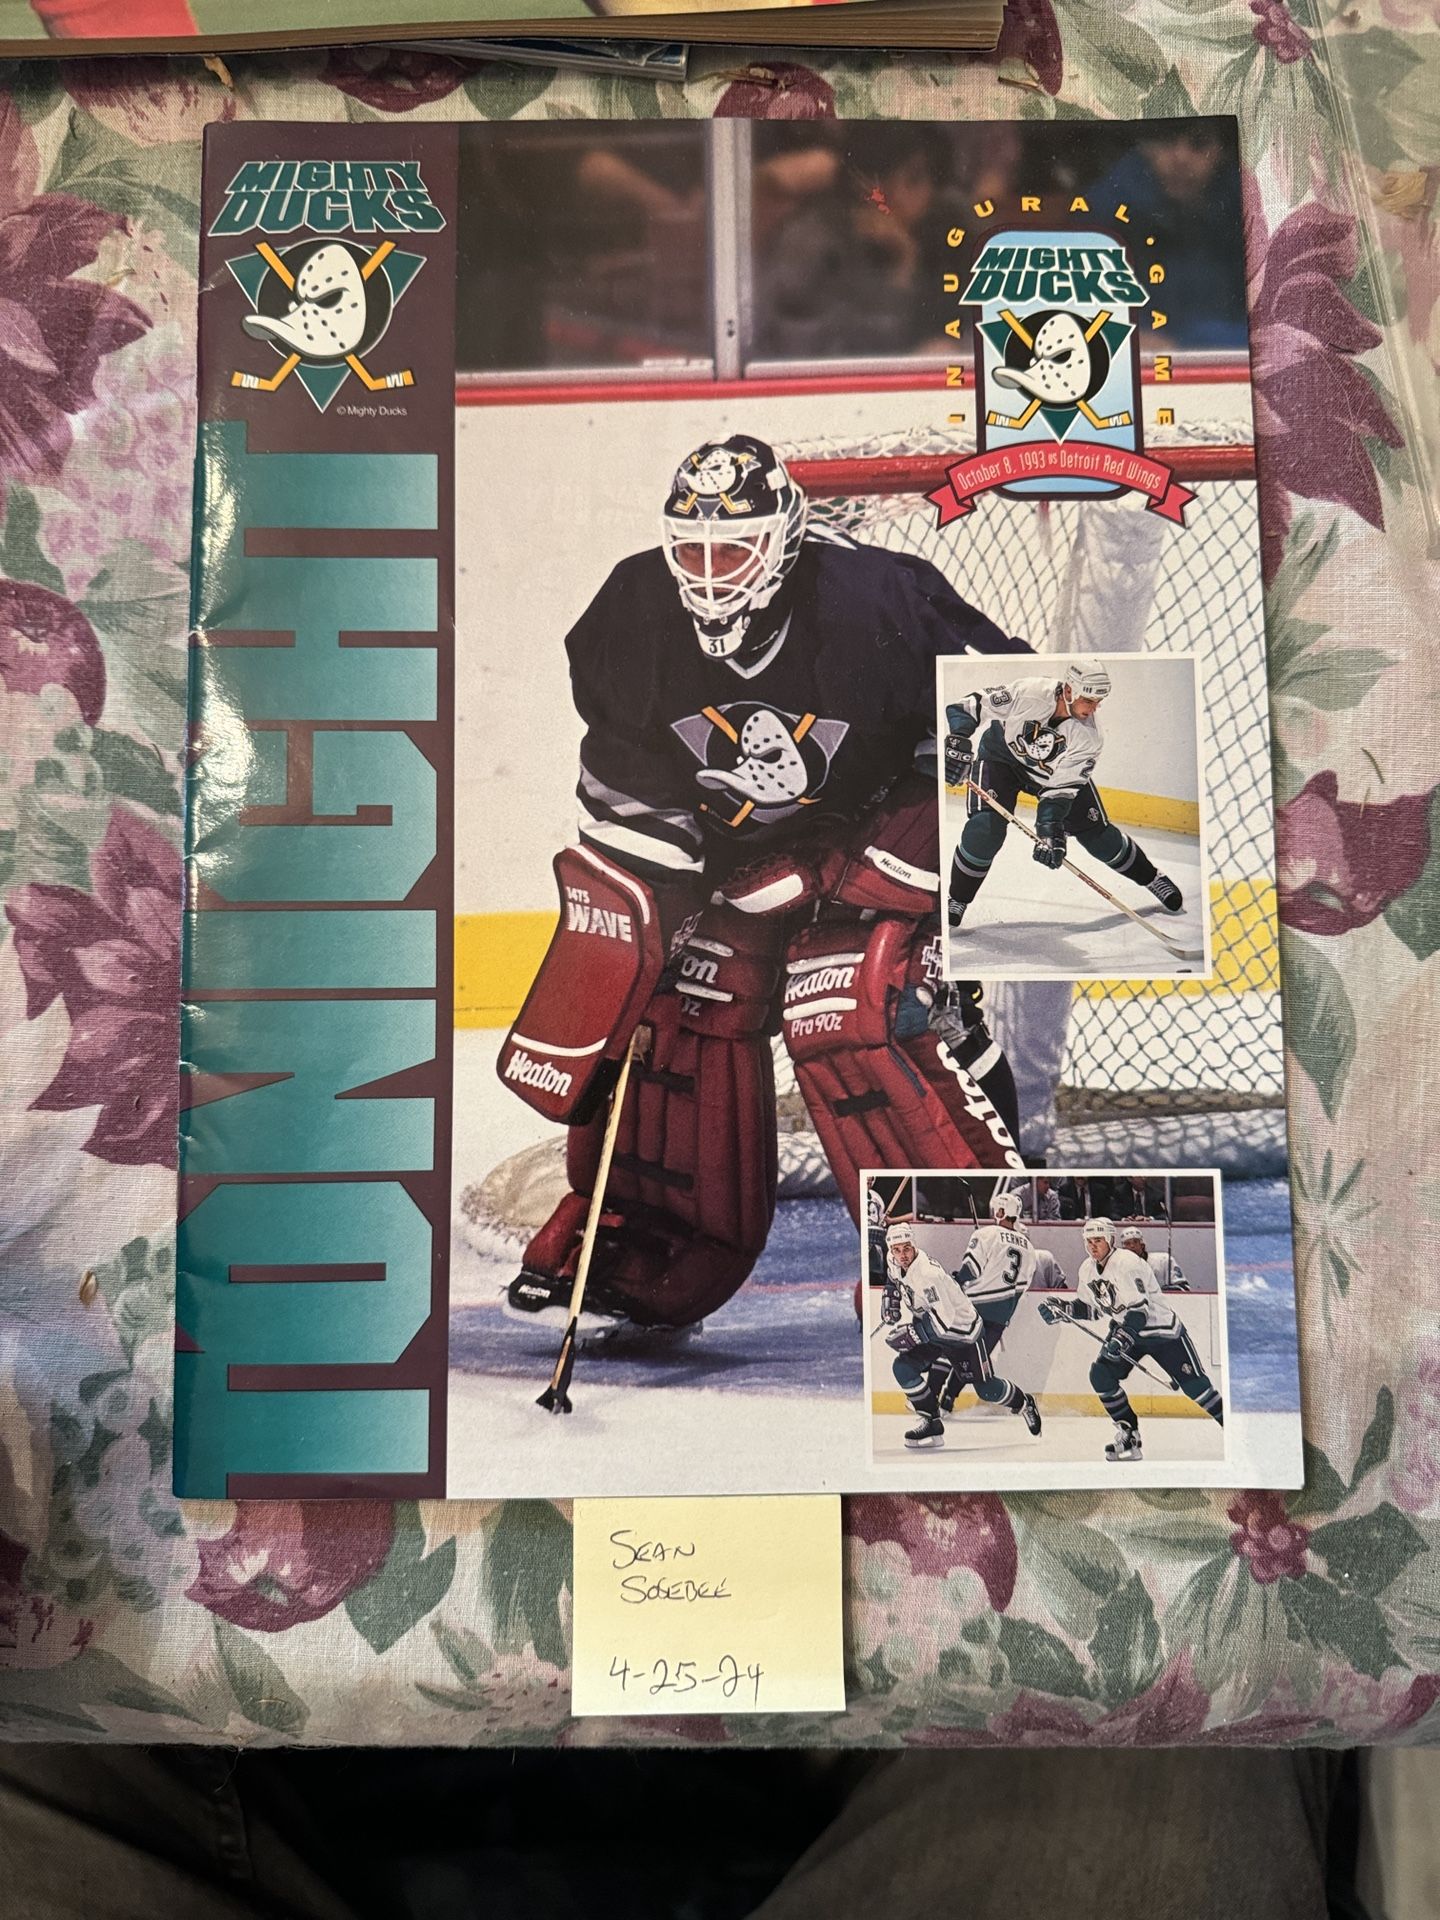 Mighty Ducks vs Detroit Red Wings 10/8 1993 Inaugural Game Program with 6 autos